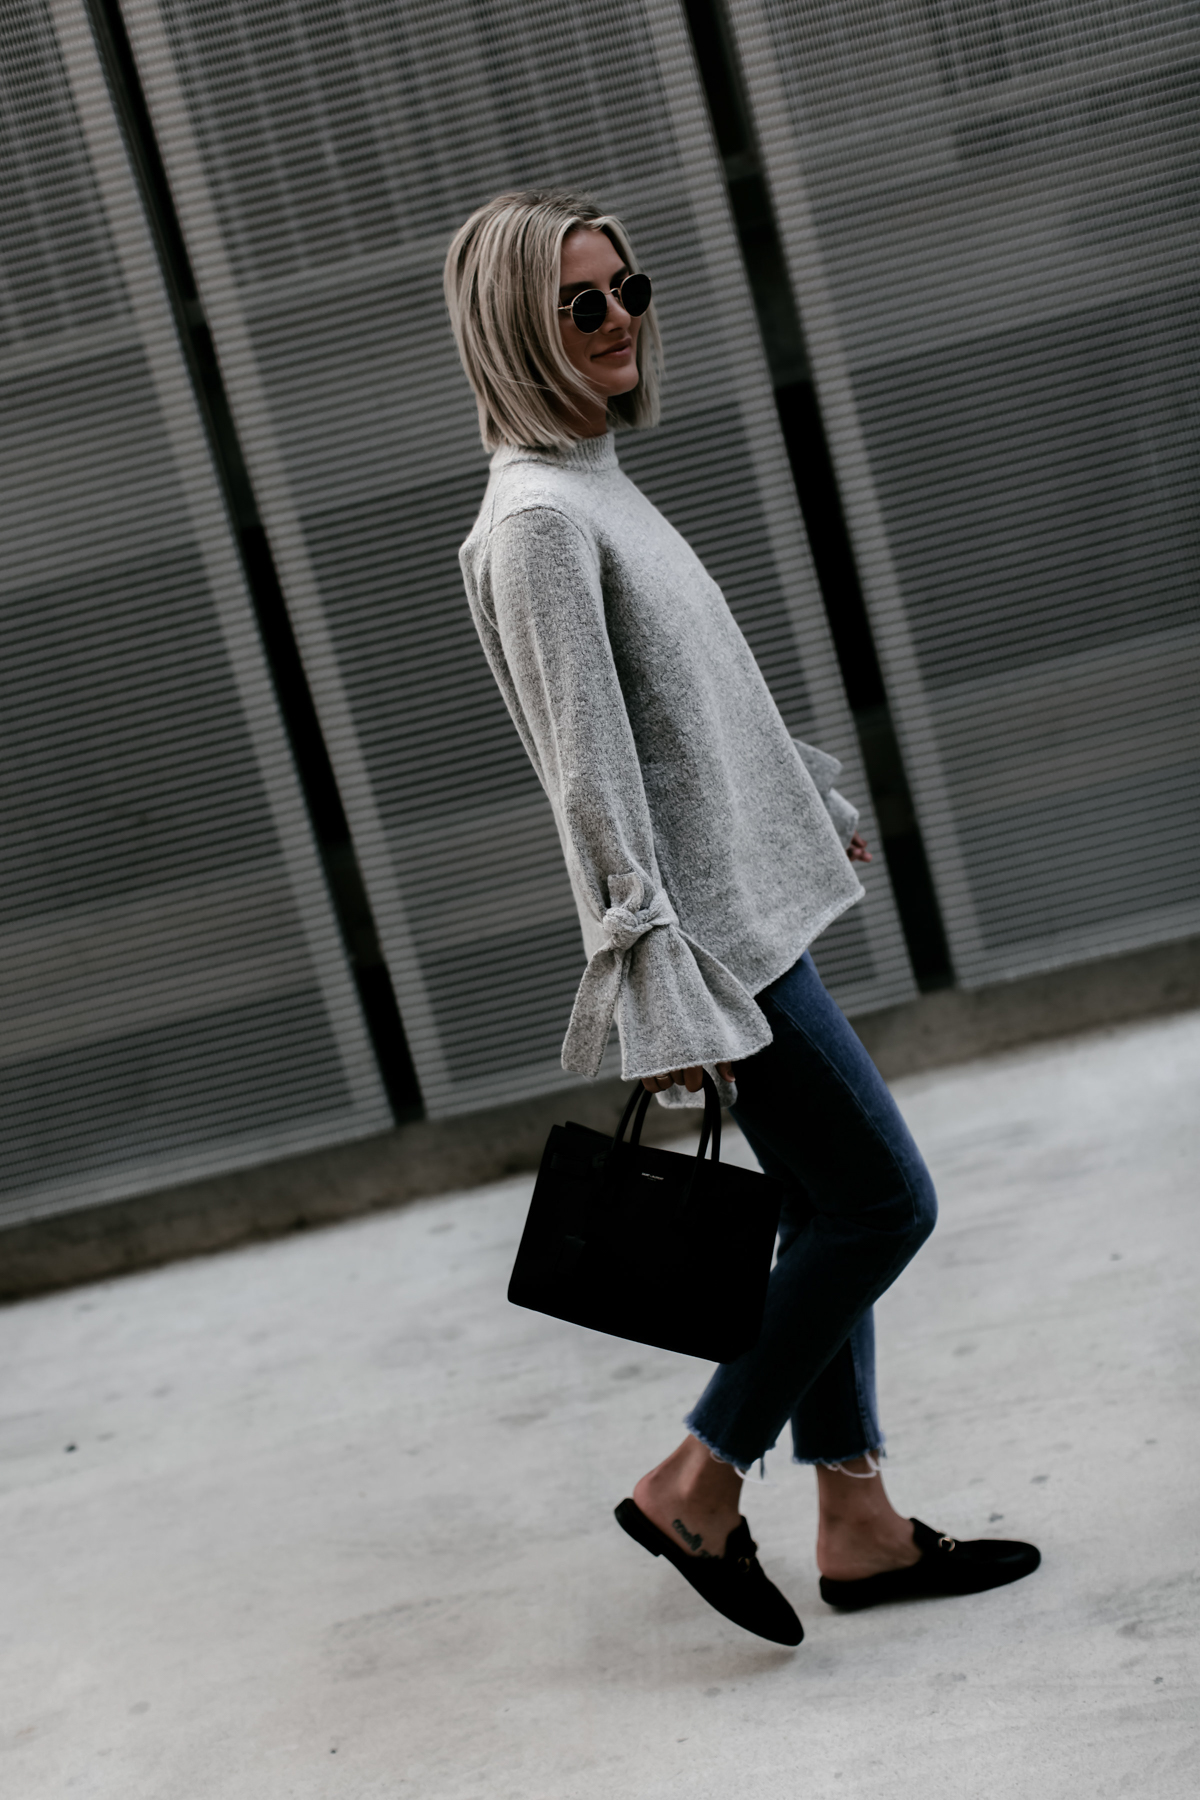 Sage Coralli in a grey tie sleeve sweater and jeans outfit